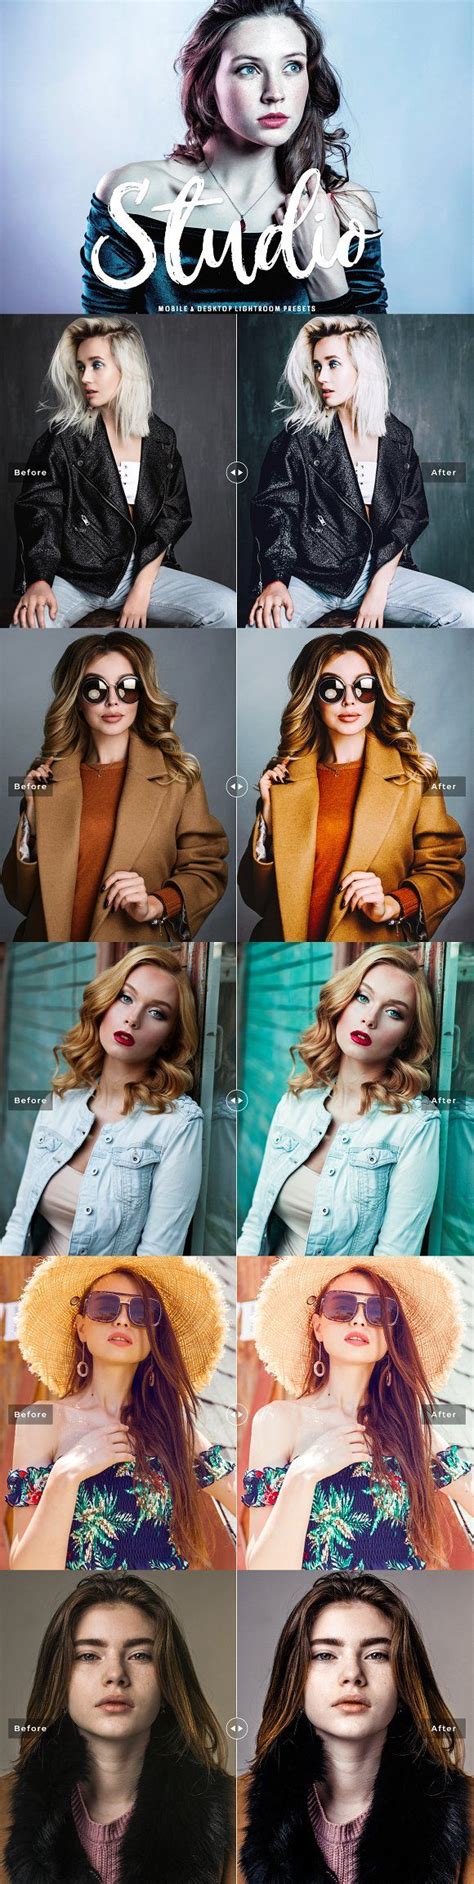 These mobile and desktop lightroom presets are created to help enhance your photos as a lifestyle & portrait photographer, wedding photographer, travel blogger, social media influencer or. Studio Lightroom Presets Pack | Photoshoot studio ...